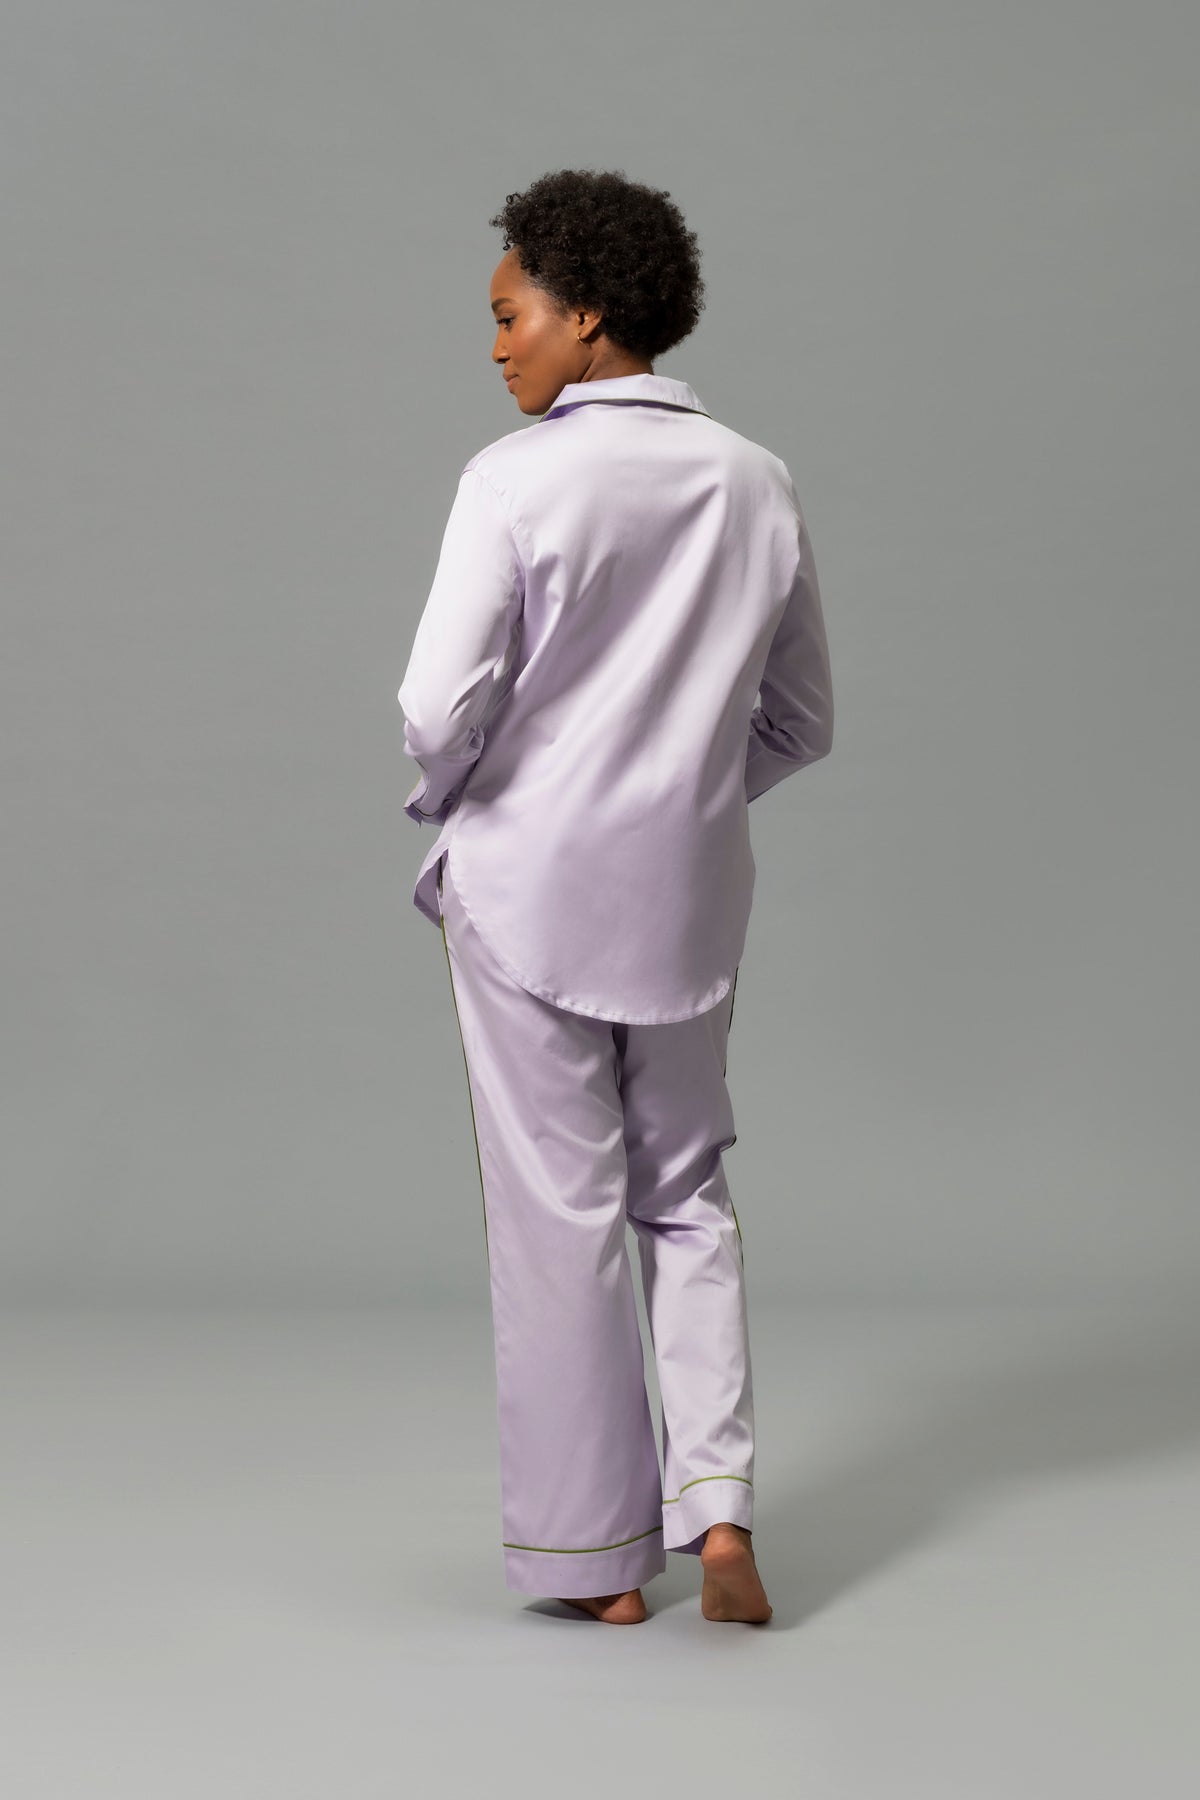 Back View of Model Wearing Matouk Nocturne Pajama Set in Color Violet and Grass